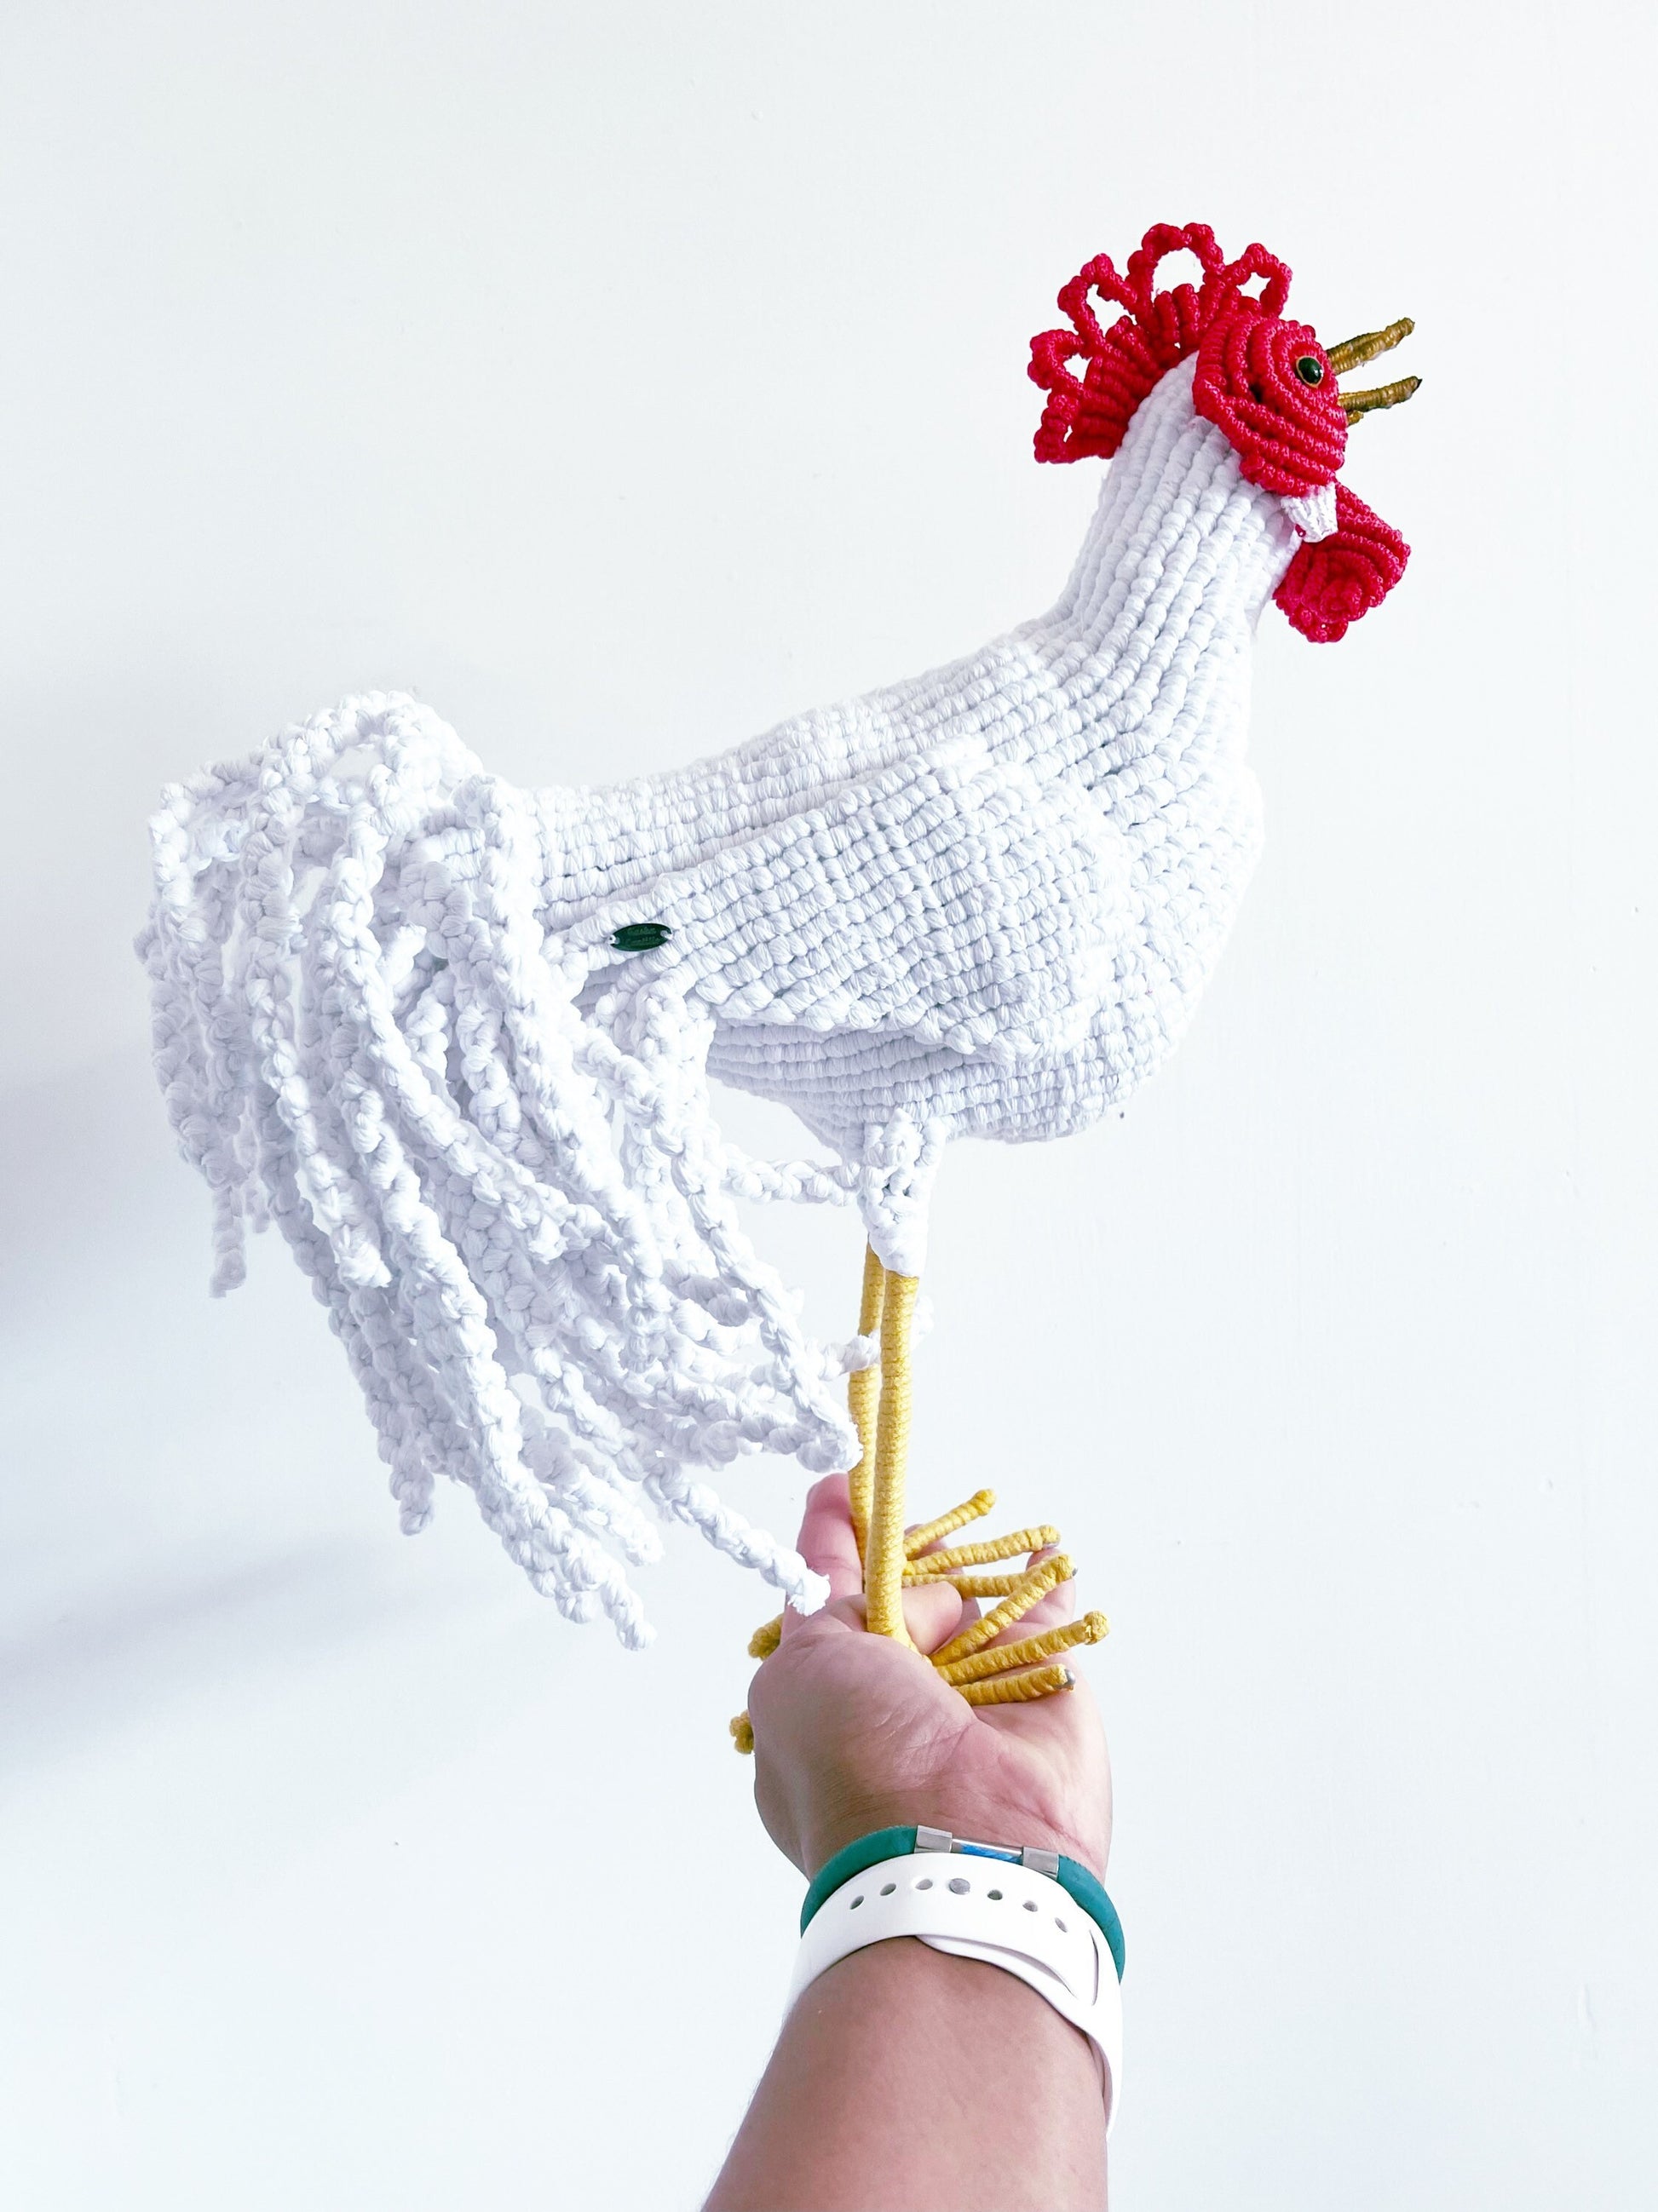 Macrame Rooster/ Rooster Art/ Rooster Sculpture/ Rooster Decor